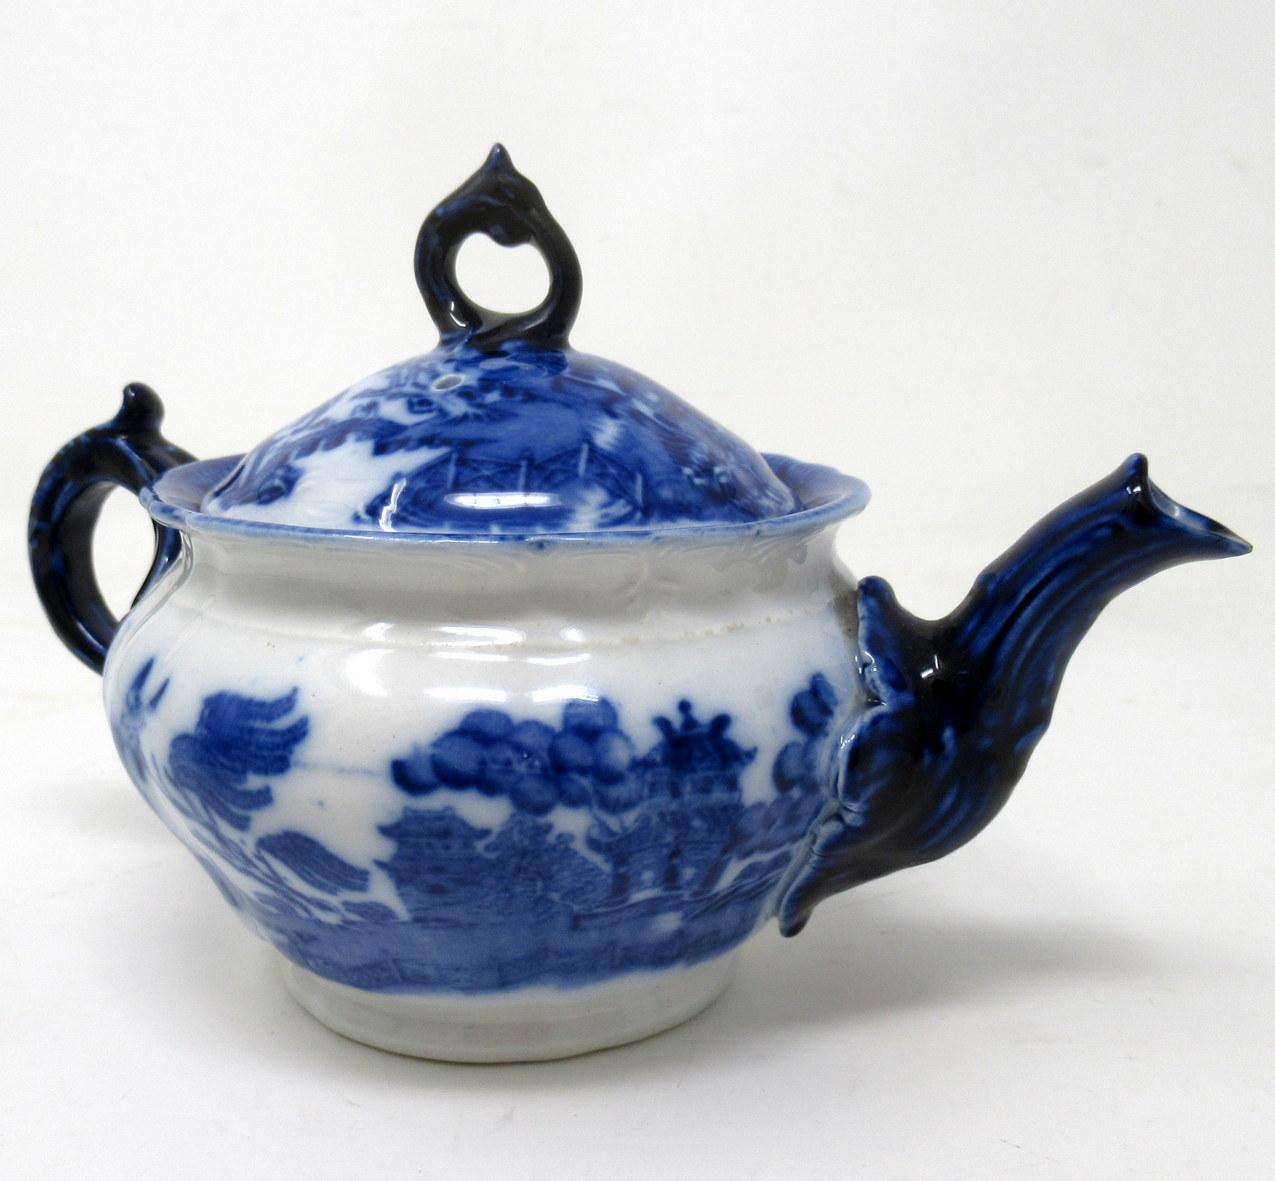 Ceramic Antique Chinese Blue White Qing Dynasty and English Flo Blue Victorian Teapot For Sale